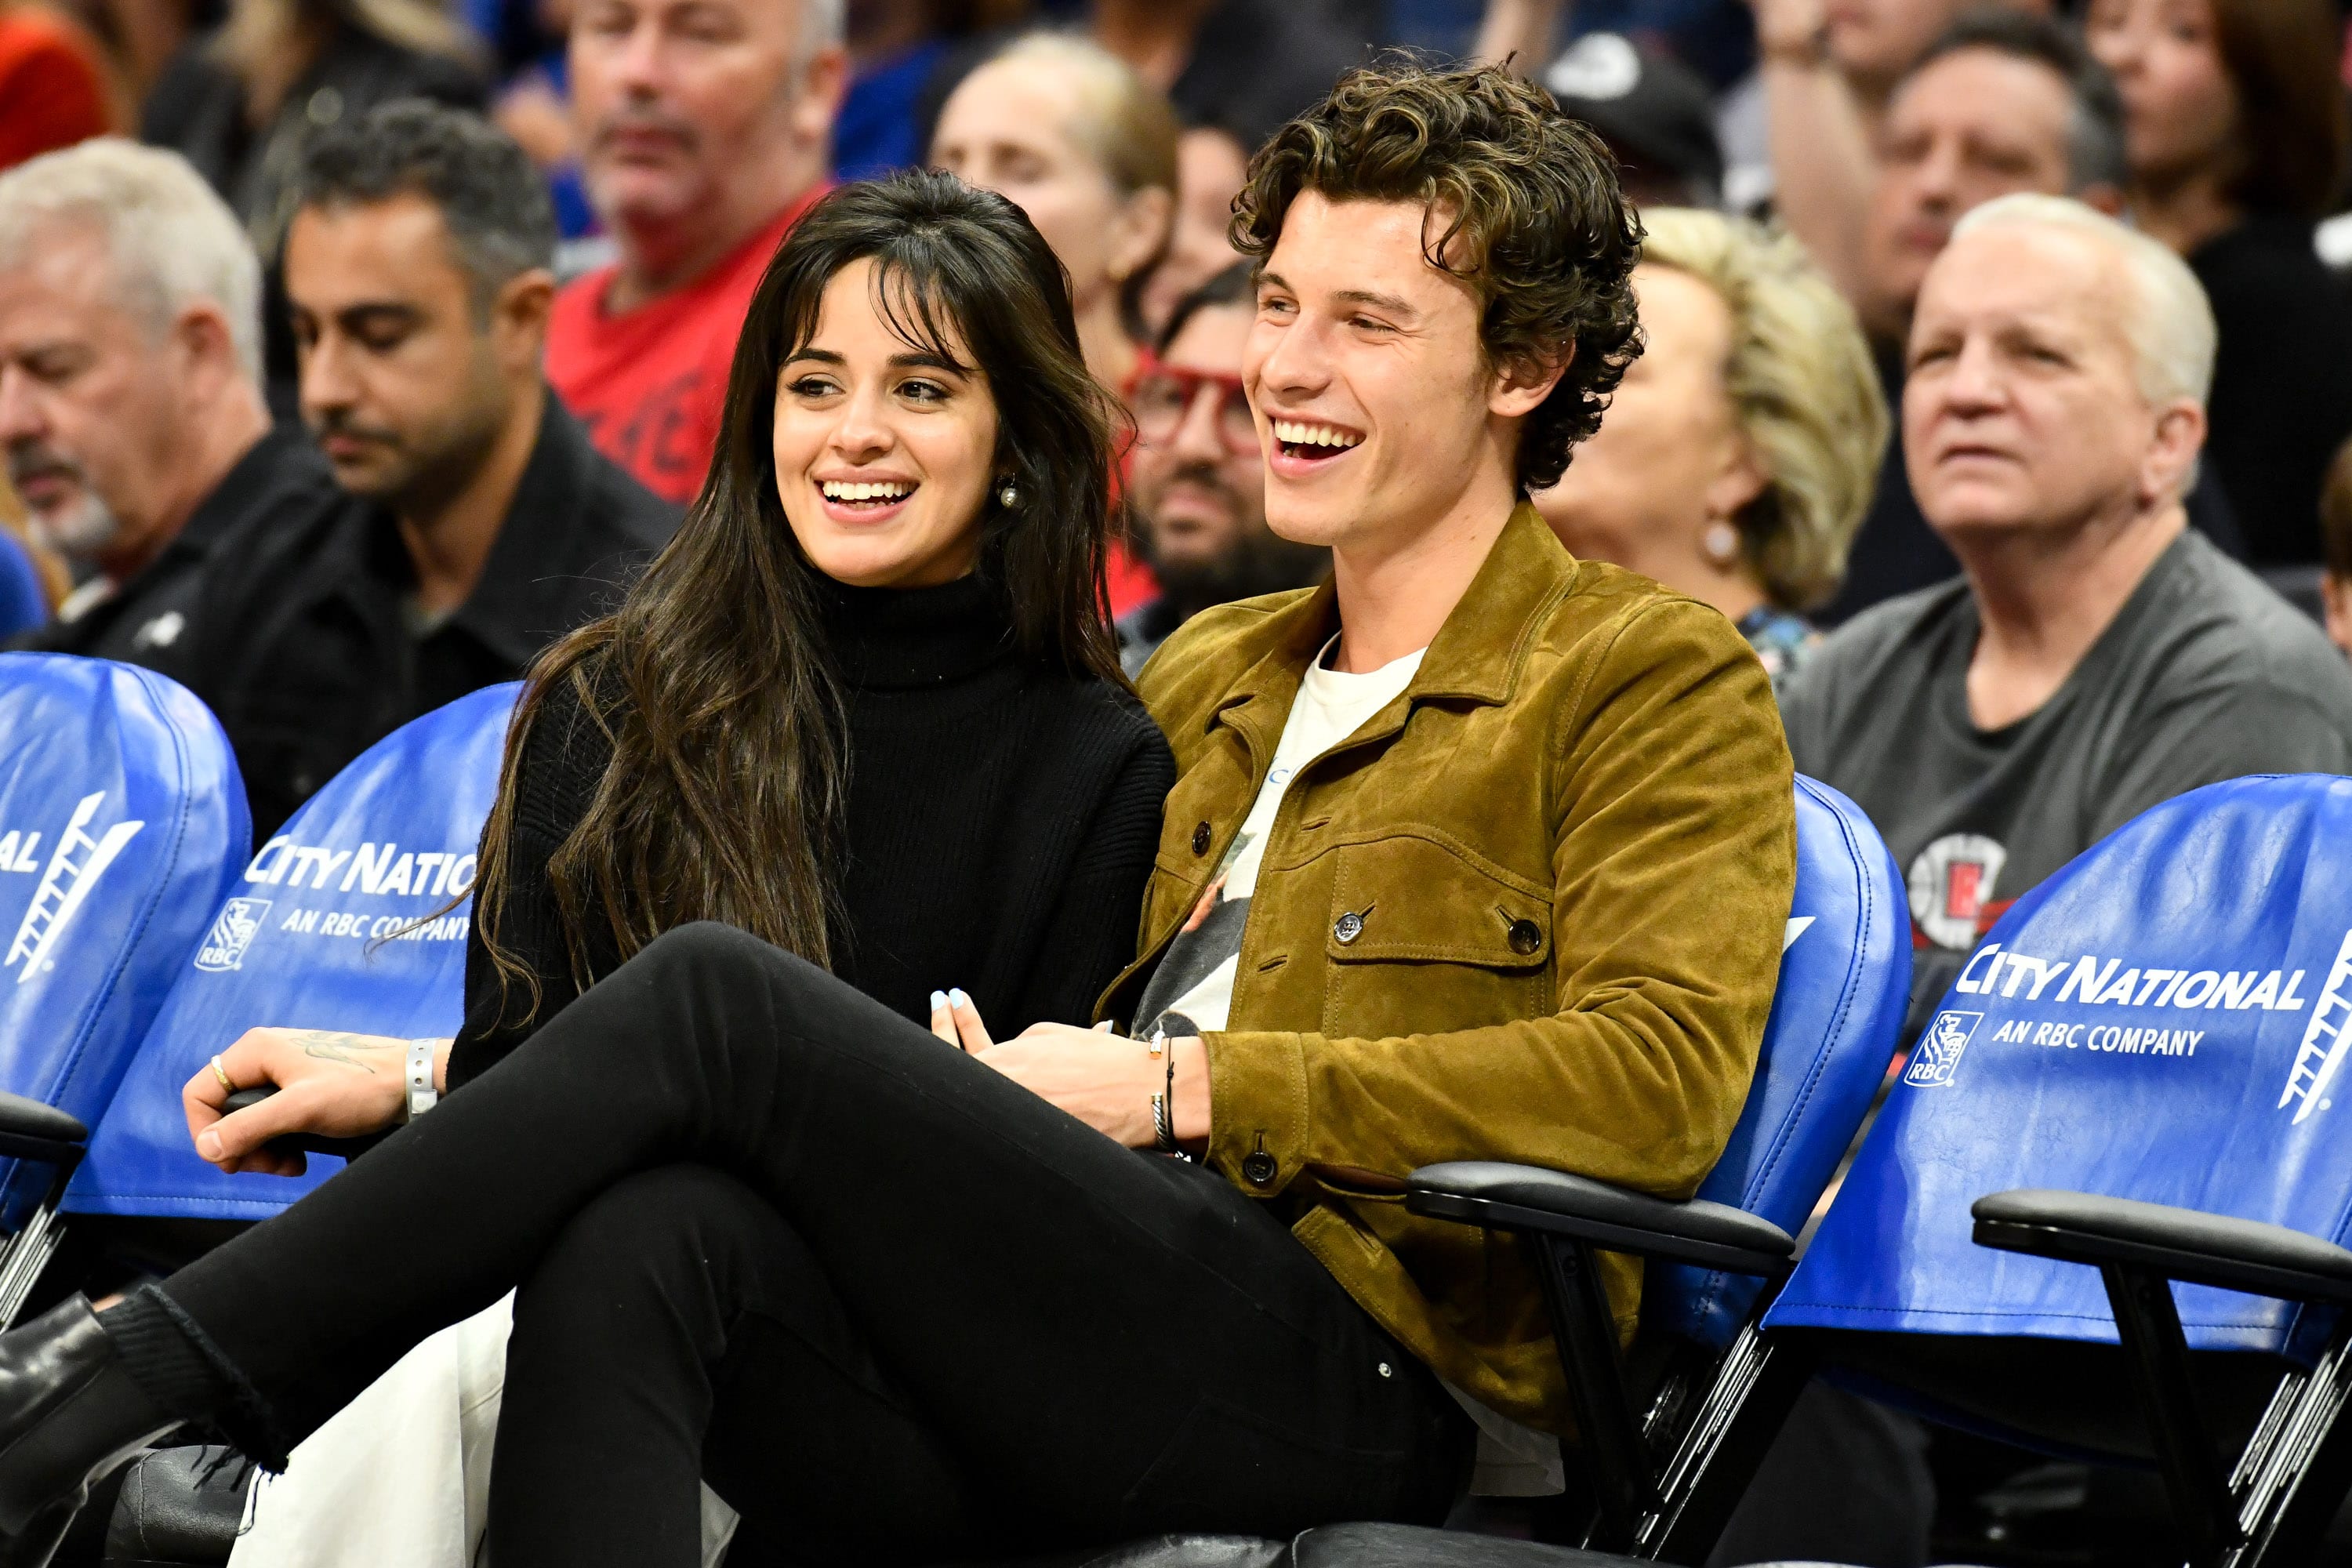 Shawn Mendes &amp; Camila Cabello: Everything We Know About Their Relationship - FASHION Magazine